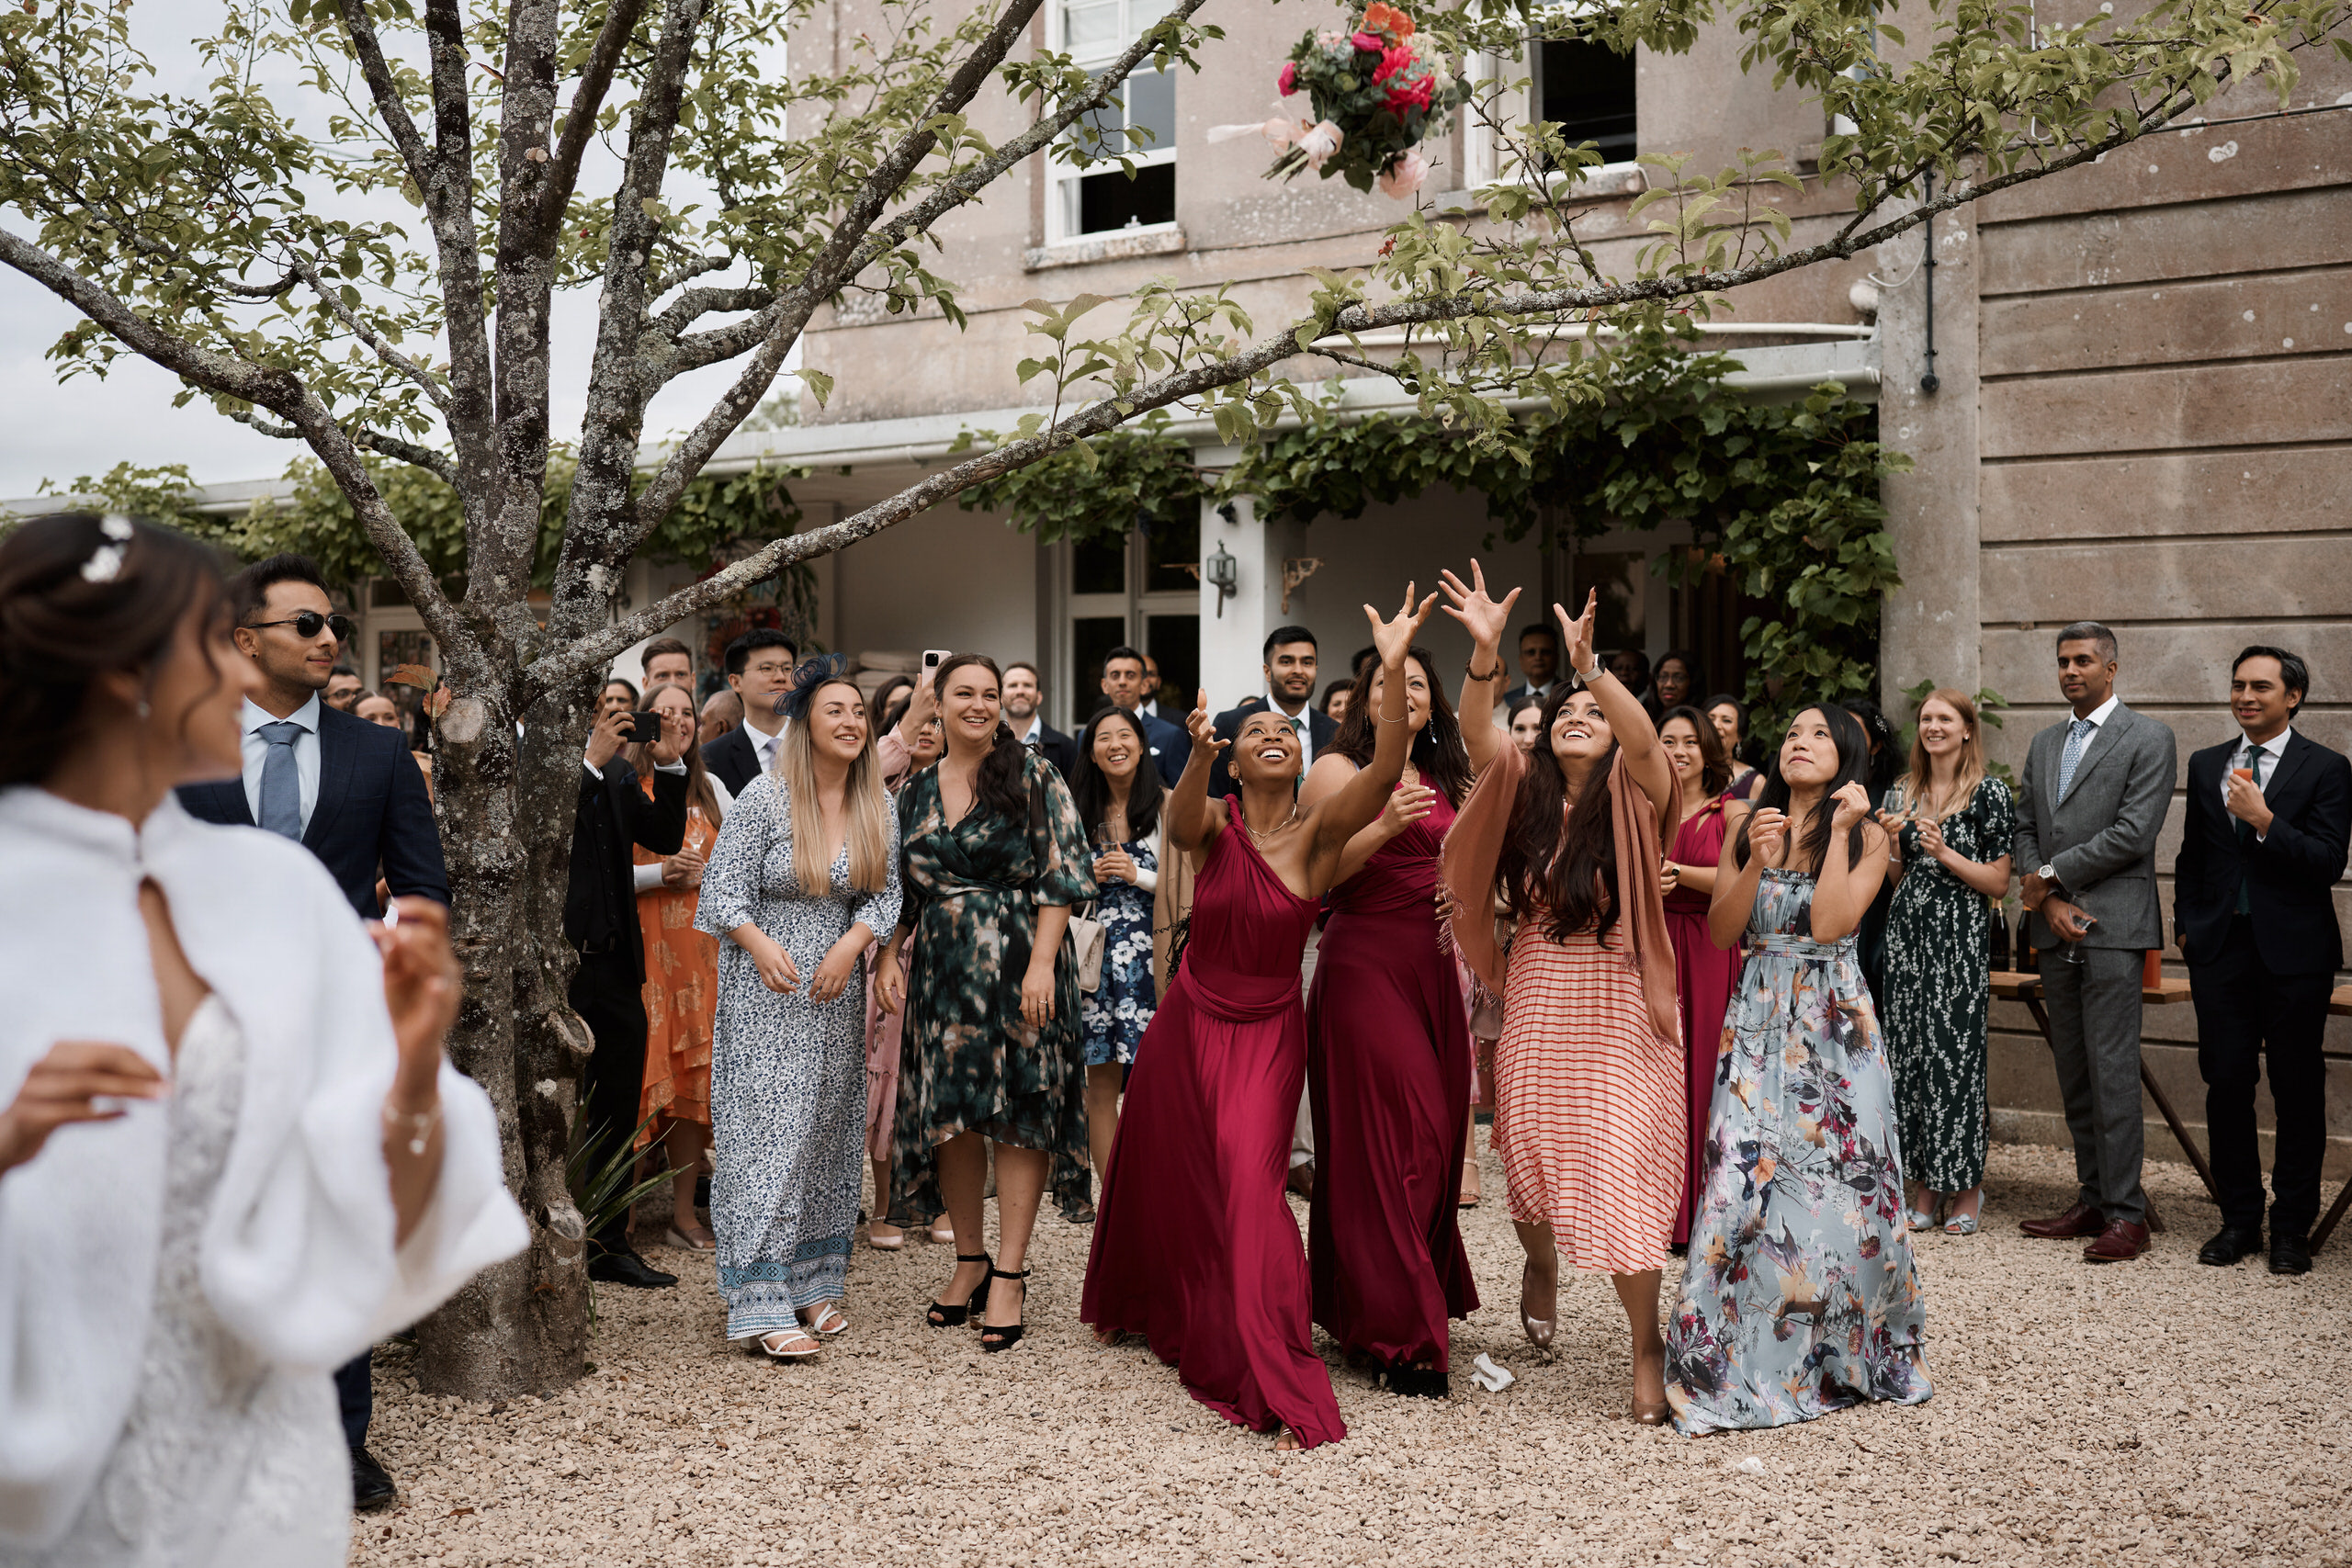 Some bridesmaids are waving their hands in the air at a wedding.